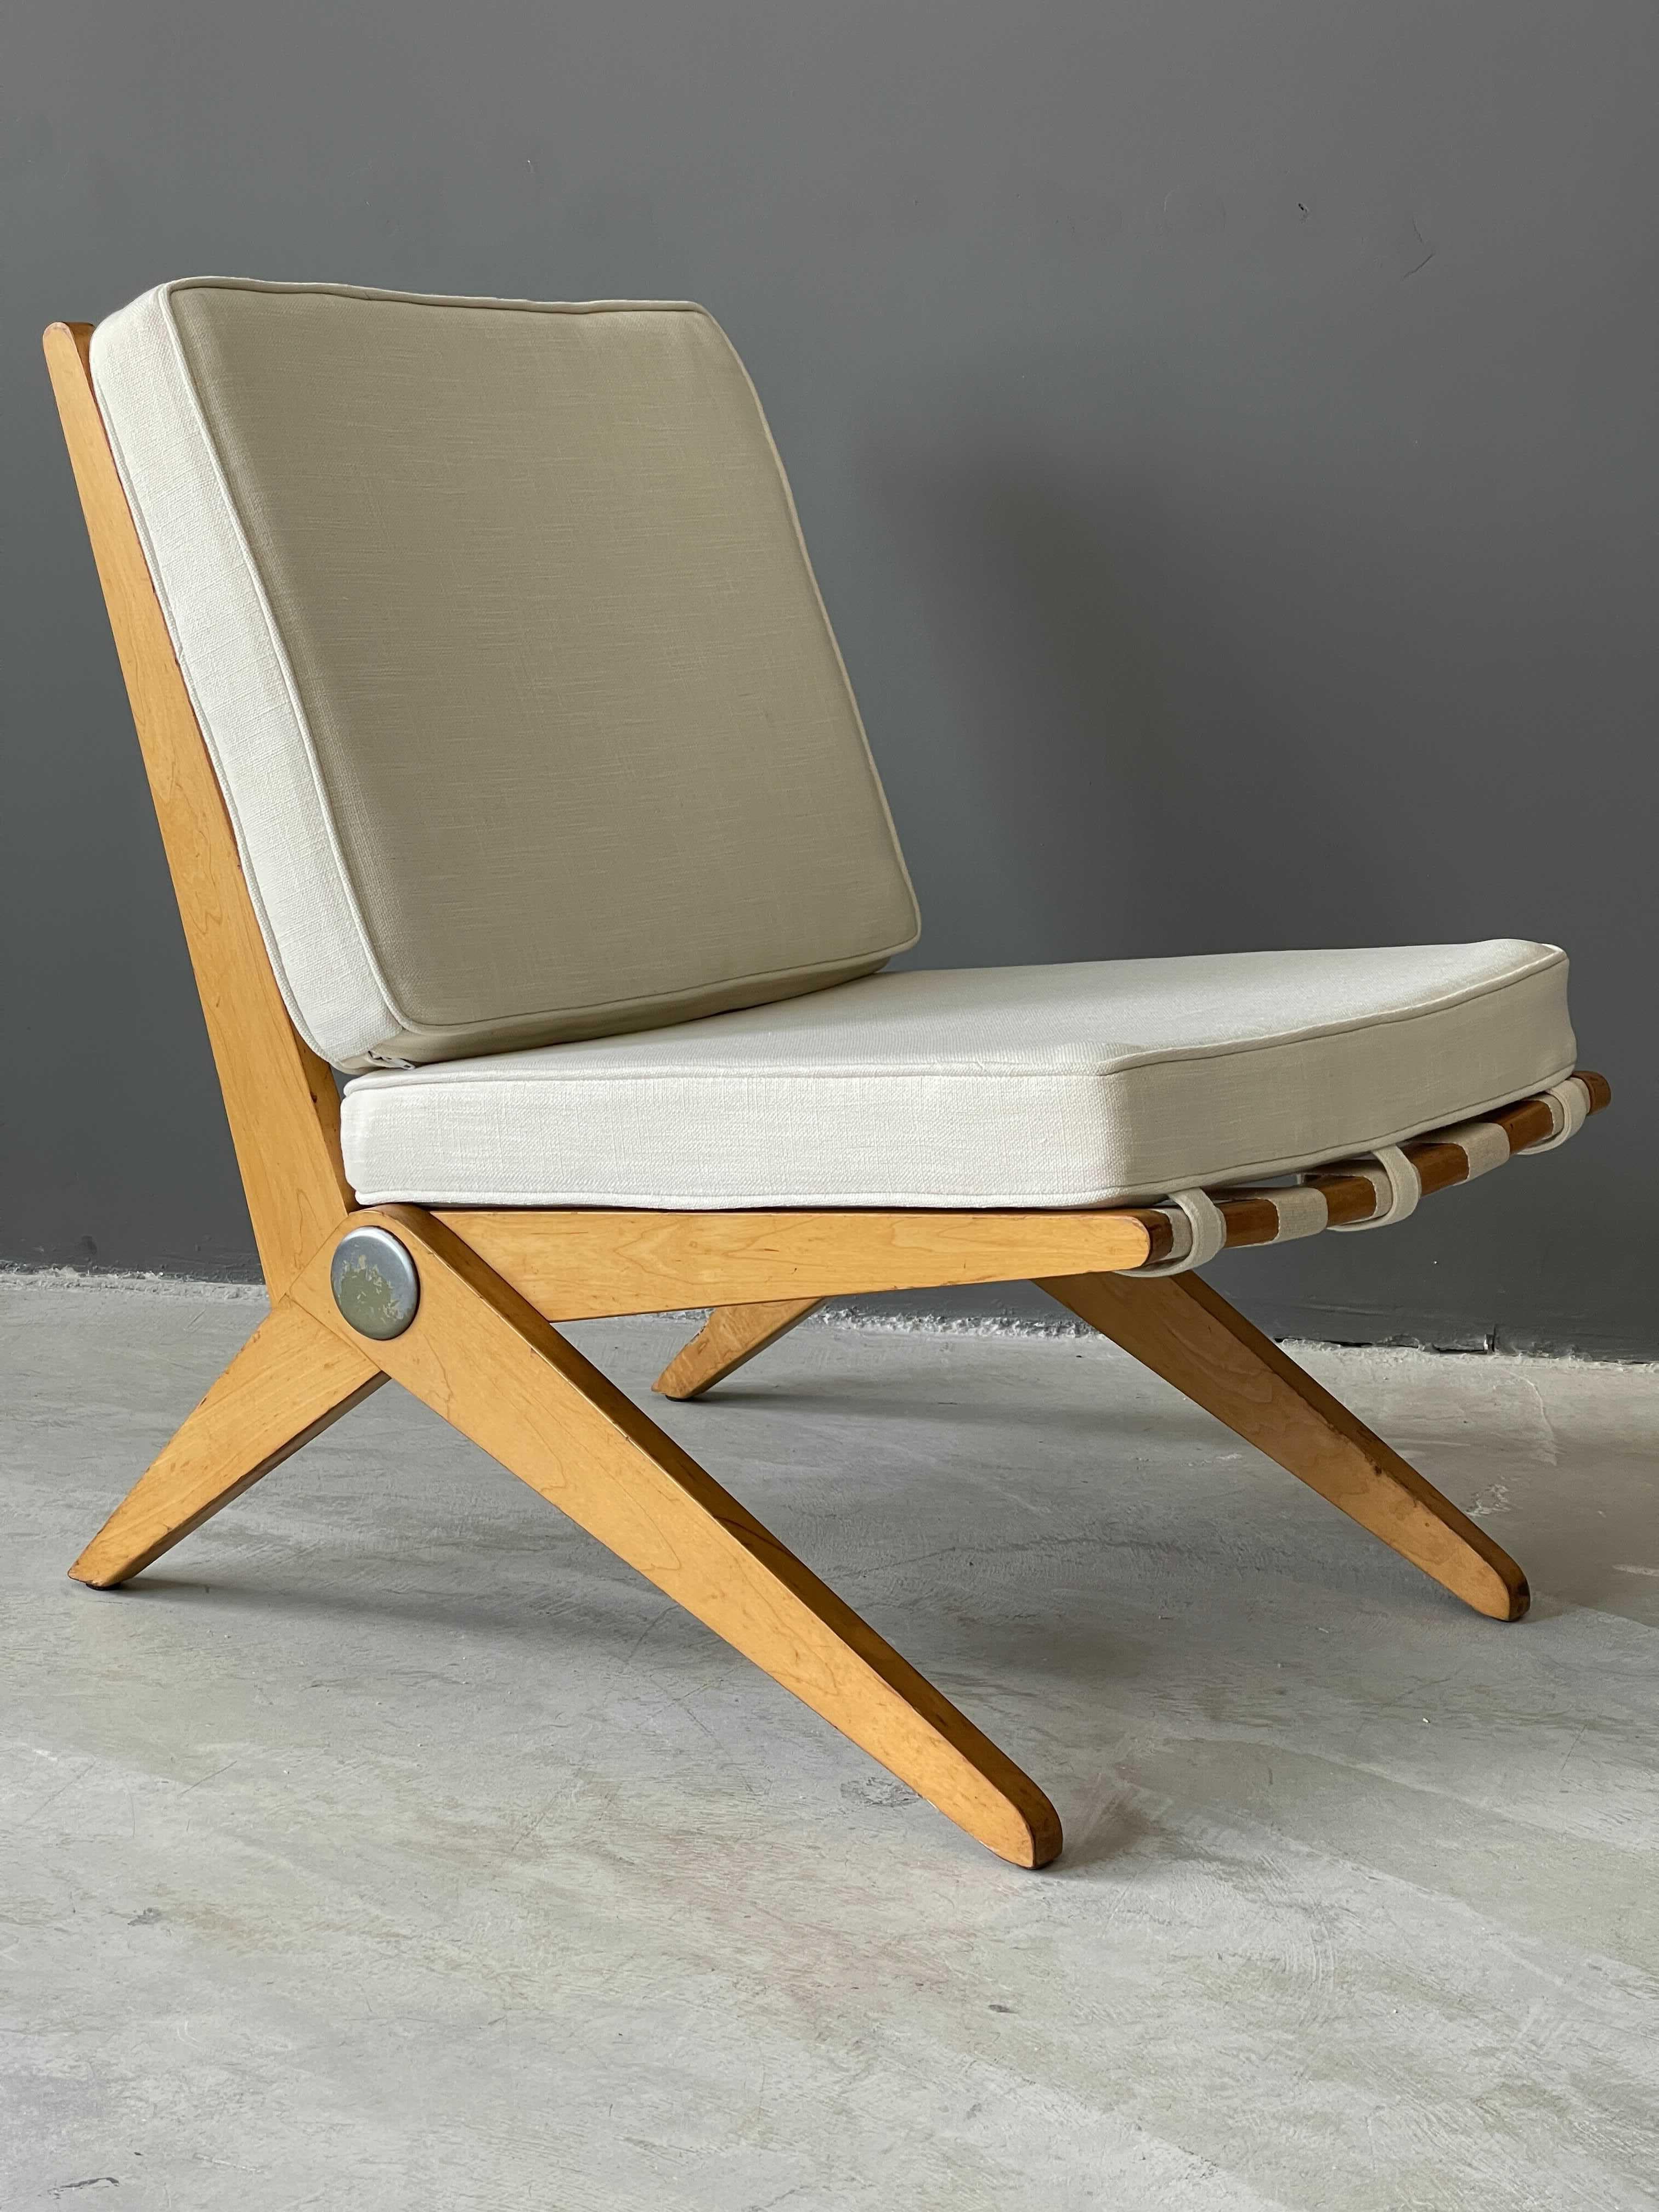 Mid-20th Century Pierre Jeanneret, Lounge Chair, Wood, Webbing, Fabric, Knoll, America, 1950s